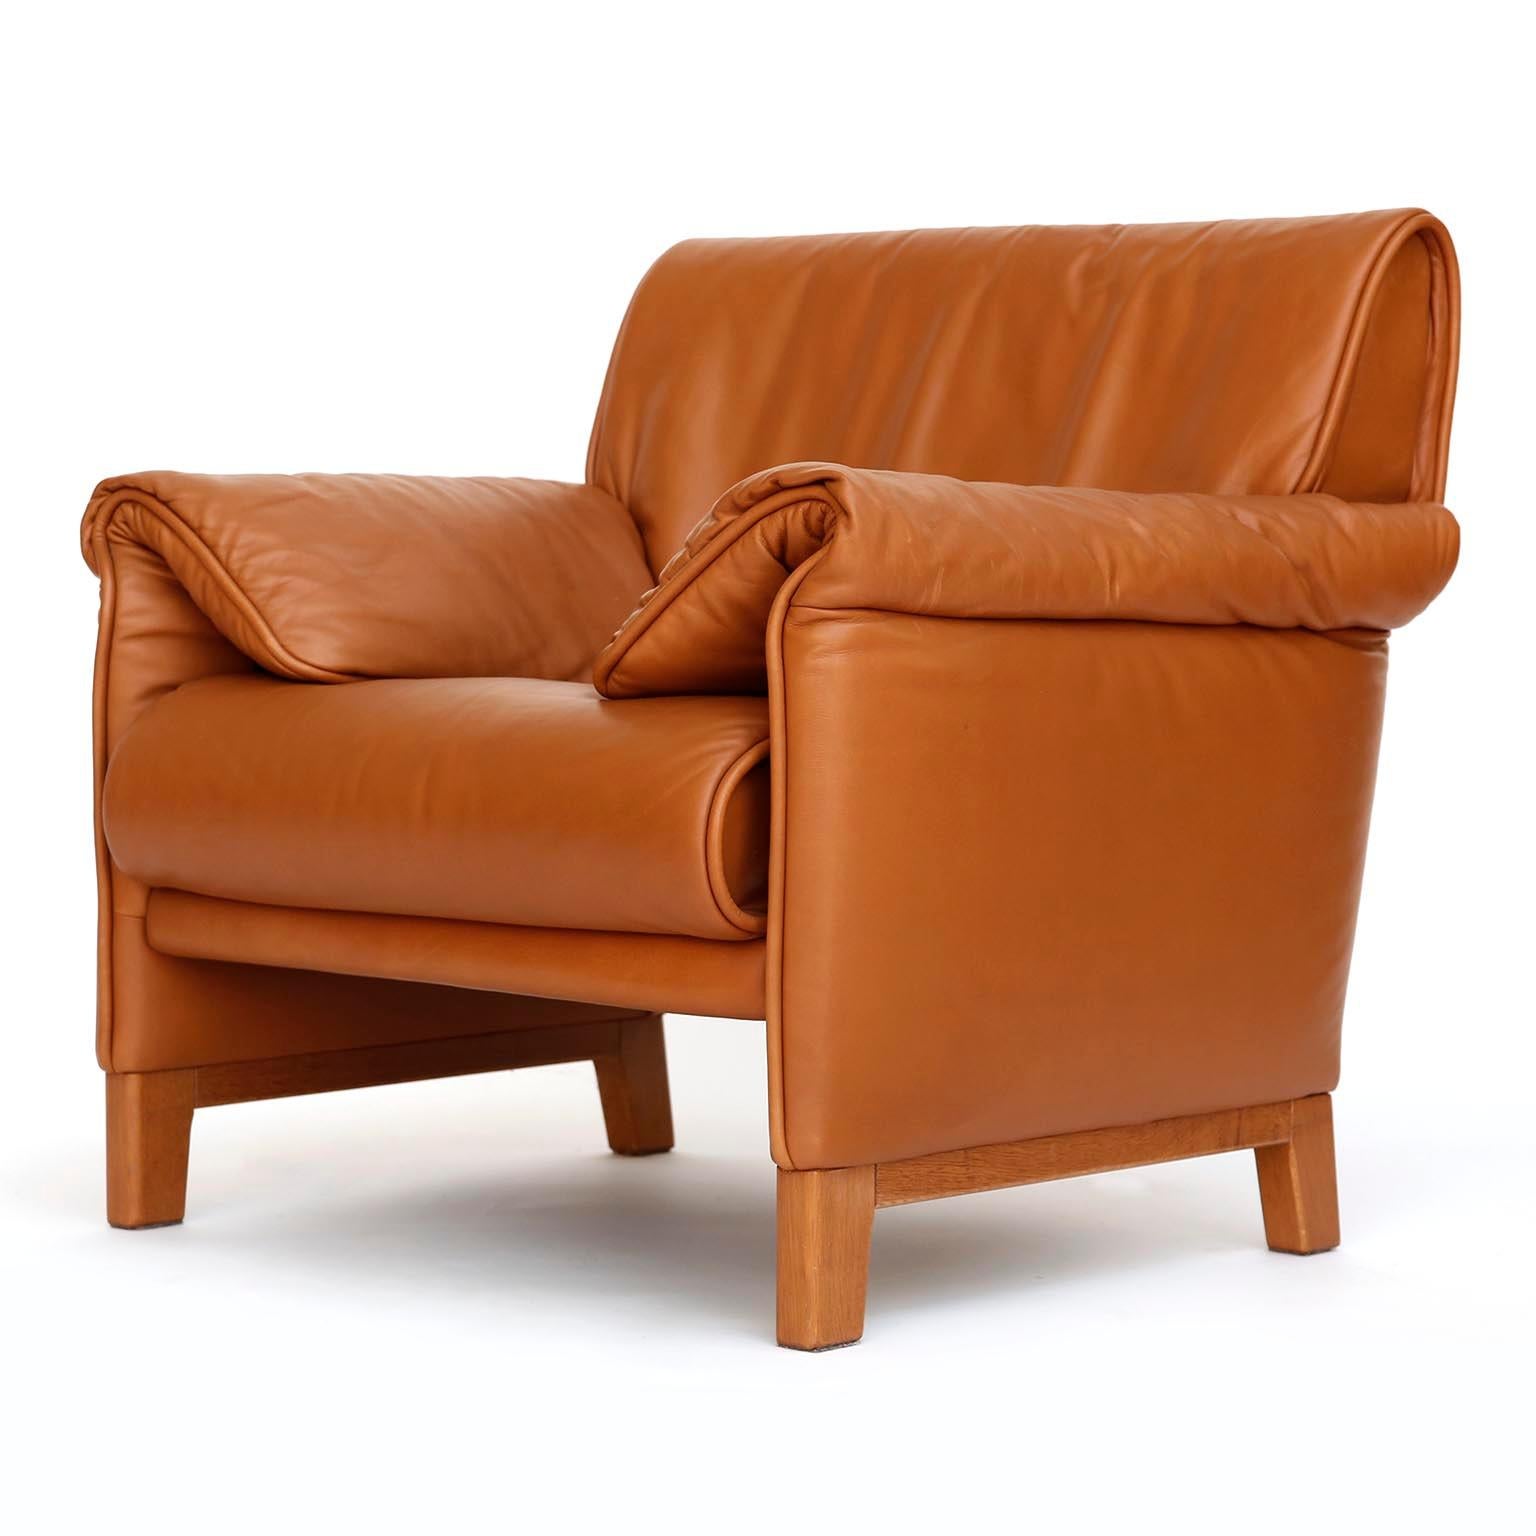 One of four De Sede 'DS-14' armchairs in a warm high quality cognac brown leather with a solid Teak base, designed in 1989 and manufactured between 1989 and 1997.
The chairs are in great and almost new condition. They are labeled inside with De